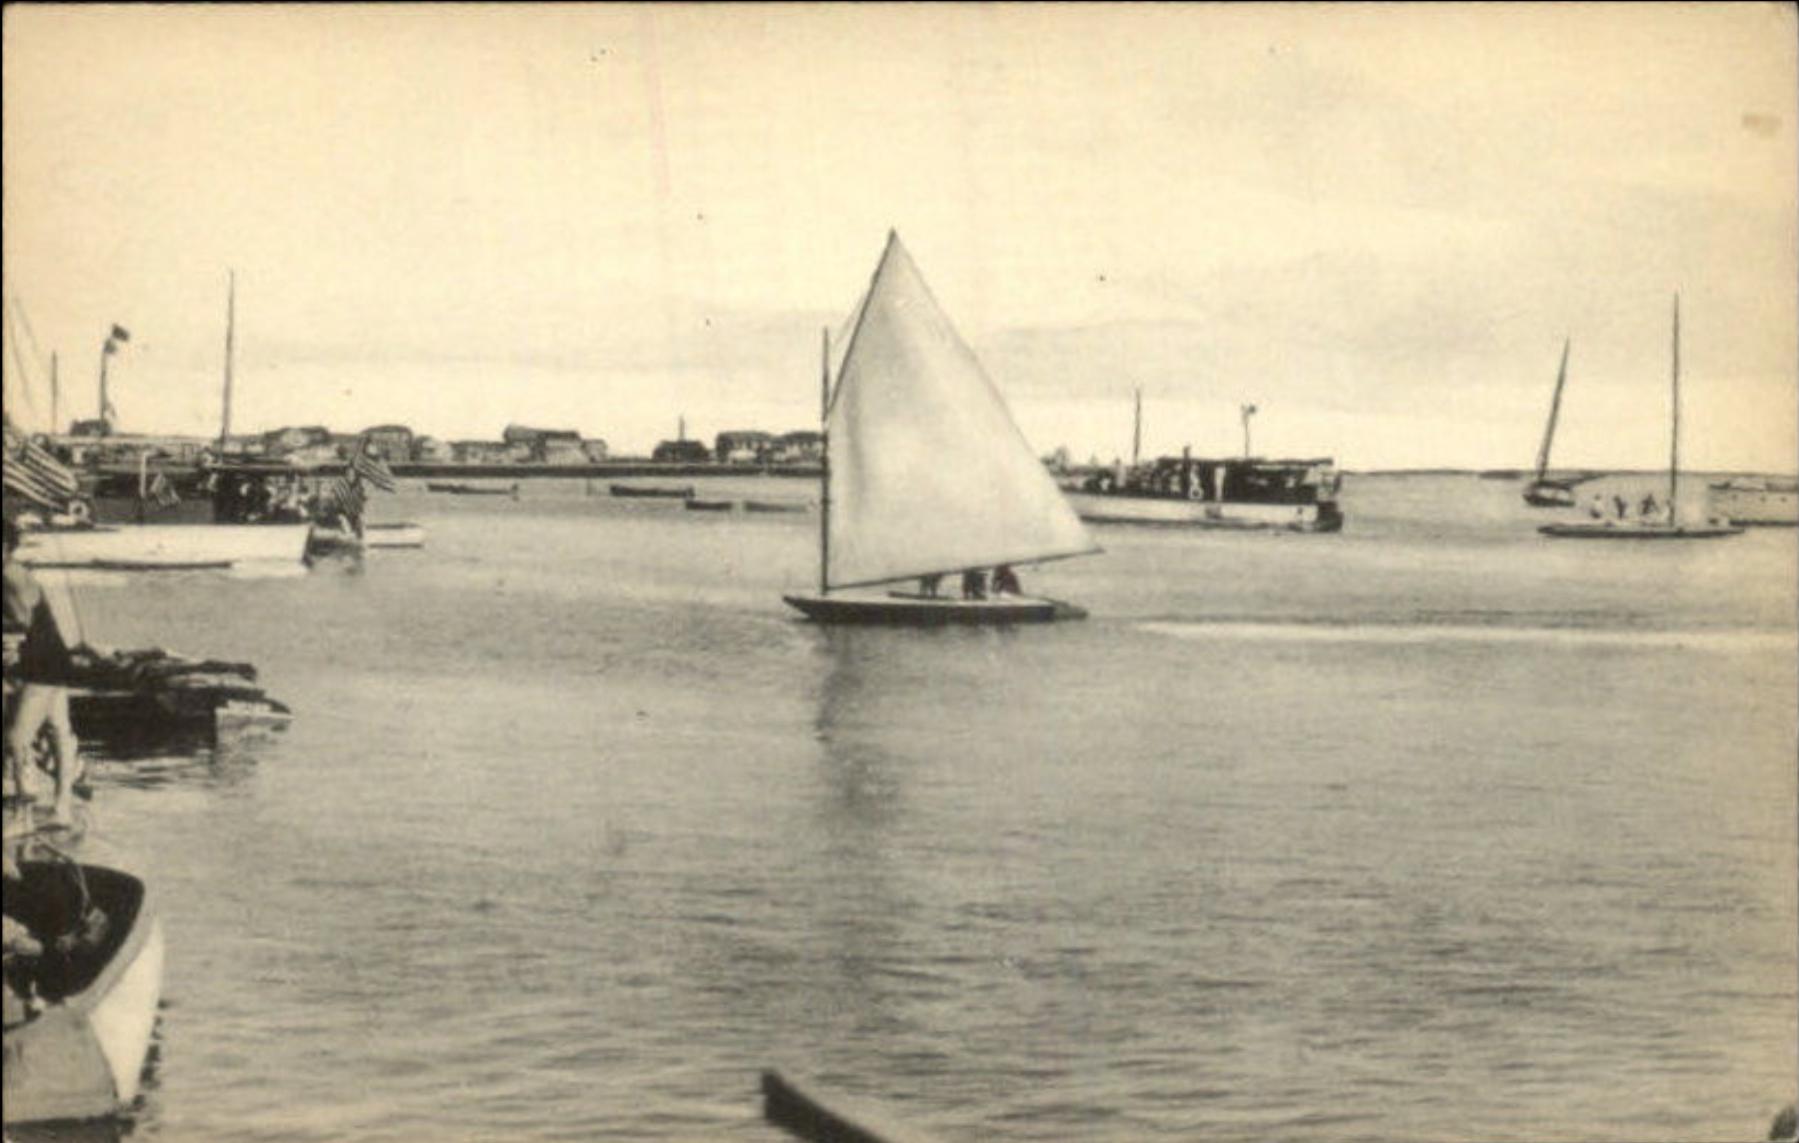 Absecon - Various boats in the harbor - c 1910